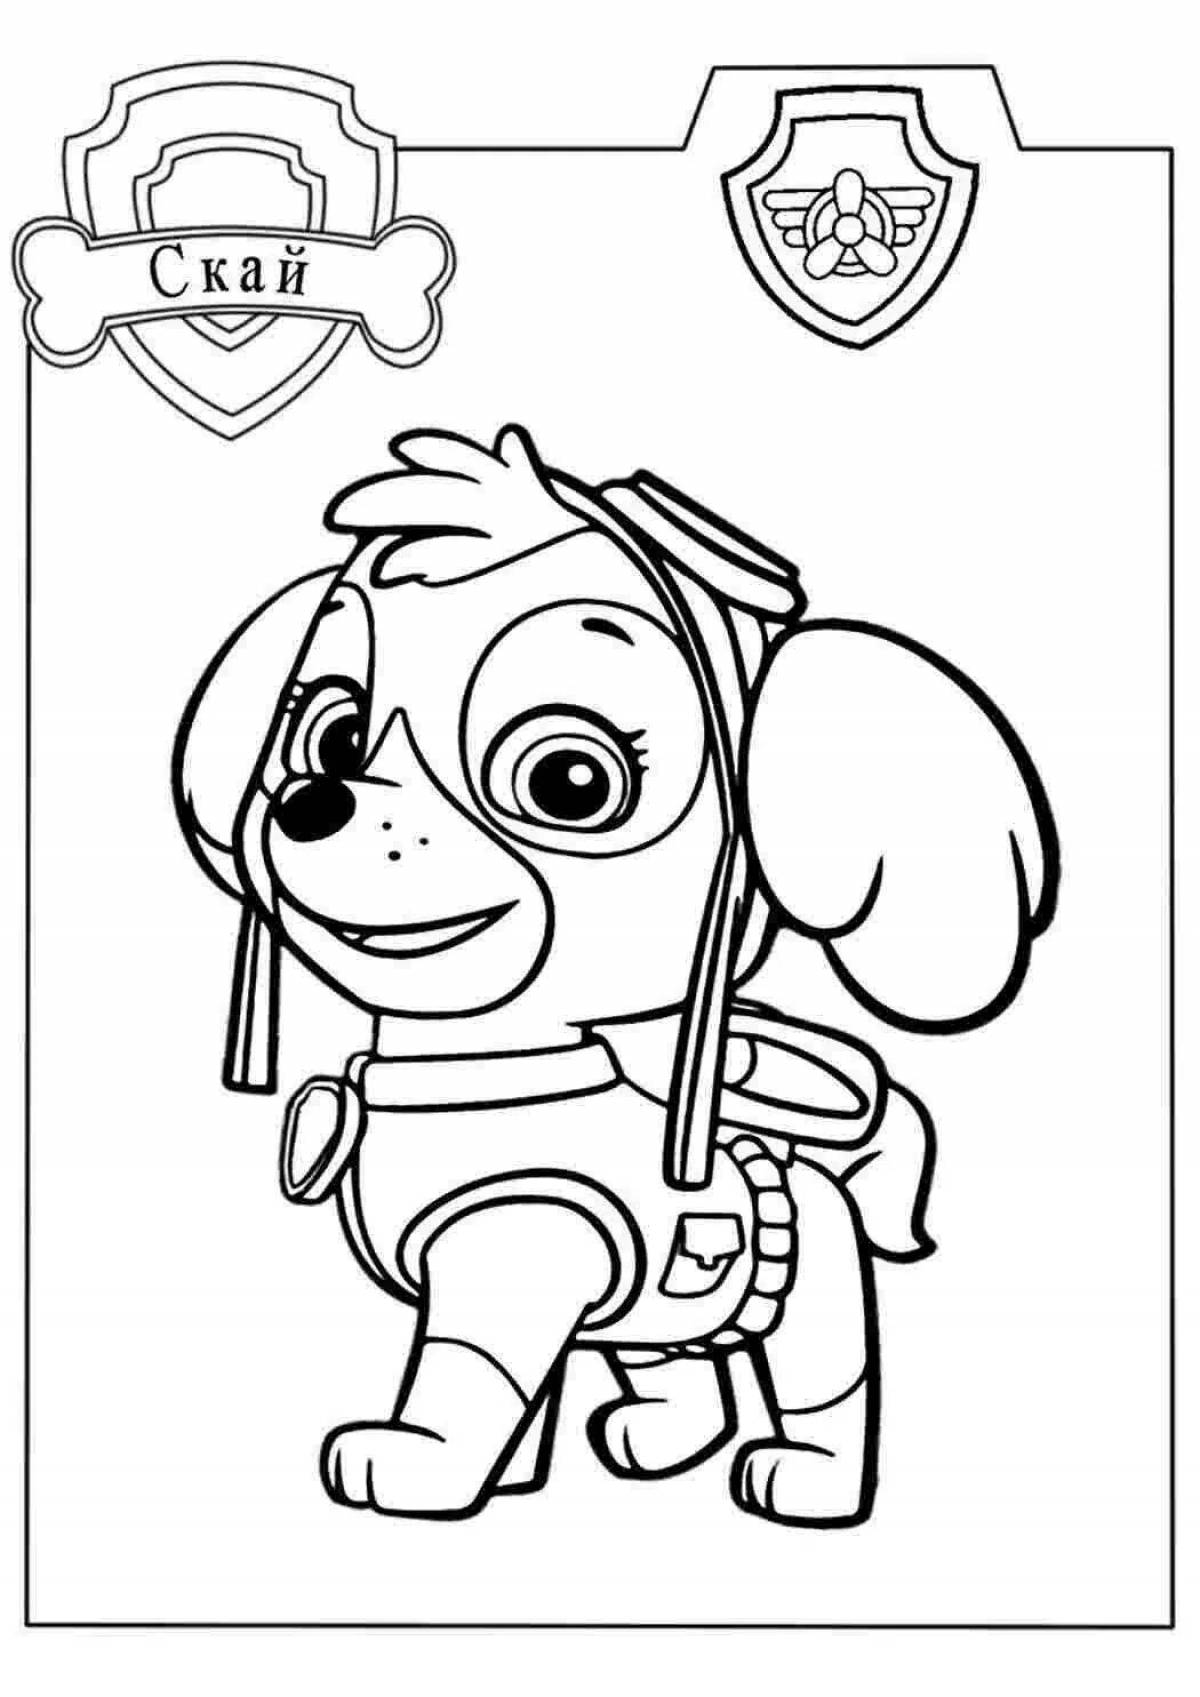 Shining sky coloring book for 3-4 year olds